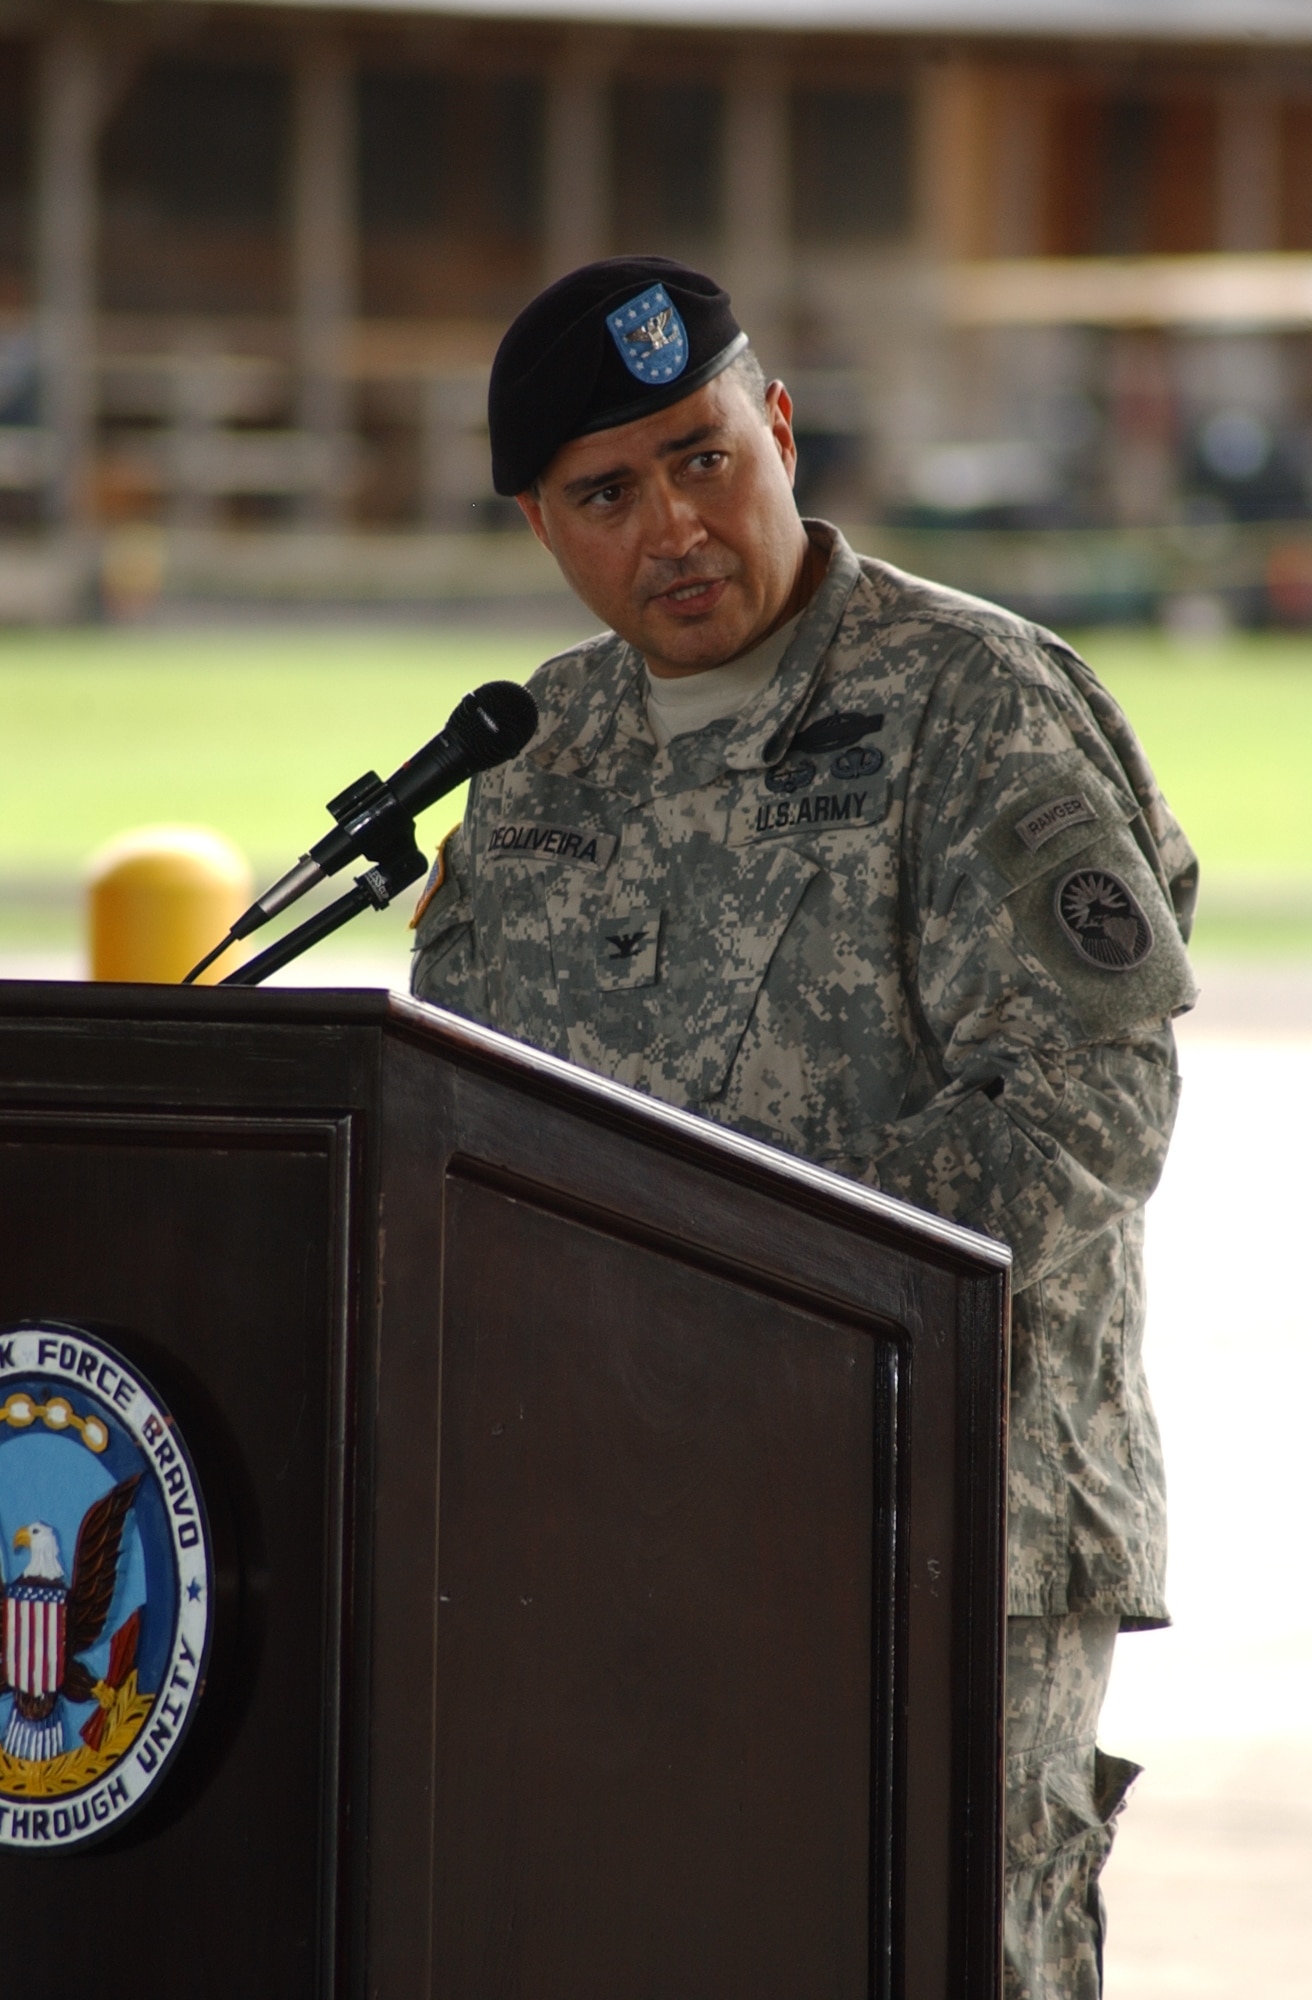 Army Col. Marcus DeOliveira, addresses members of Joint Task Force Bravo during the JTF-Bravo change of command ceremony at the Soto Cano Air Base Fire Station June 27. U.S. Air Force photo by Martin Chahin.